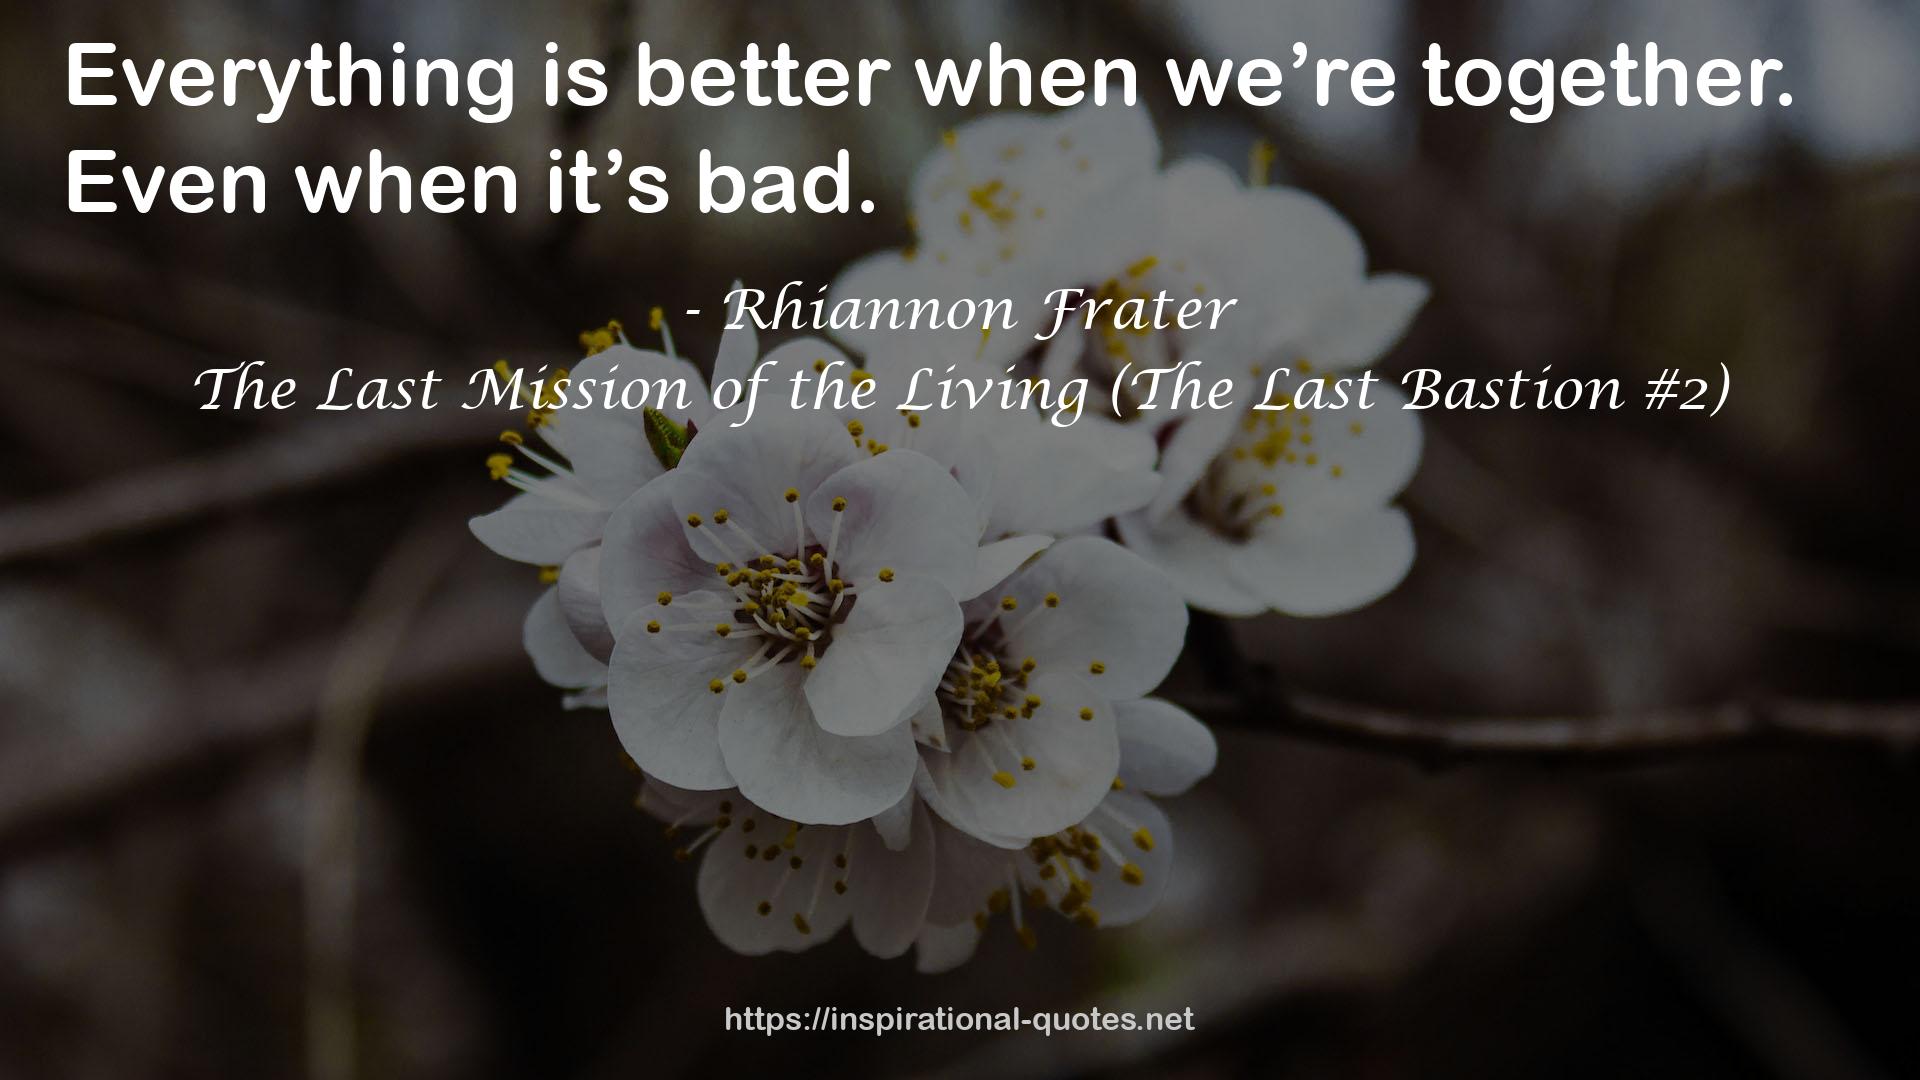 The Last Mission of the Living (The Last Bastion #2) QUOTES